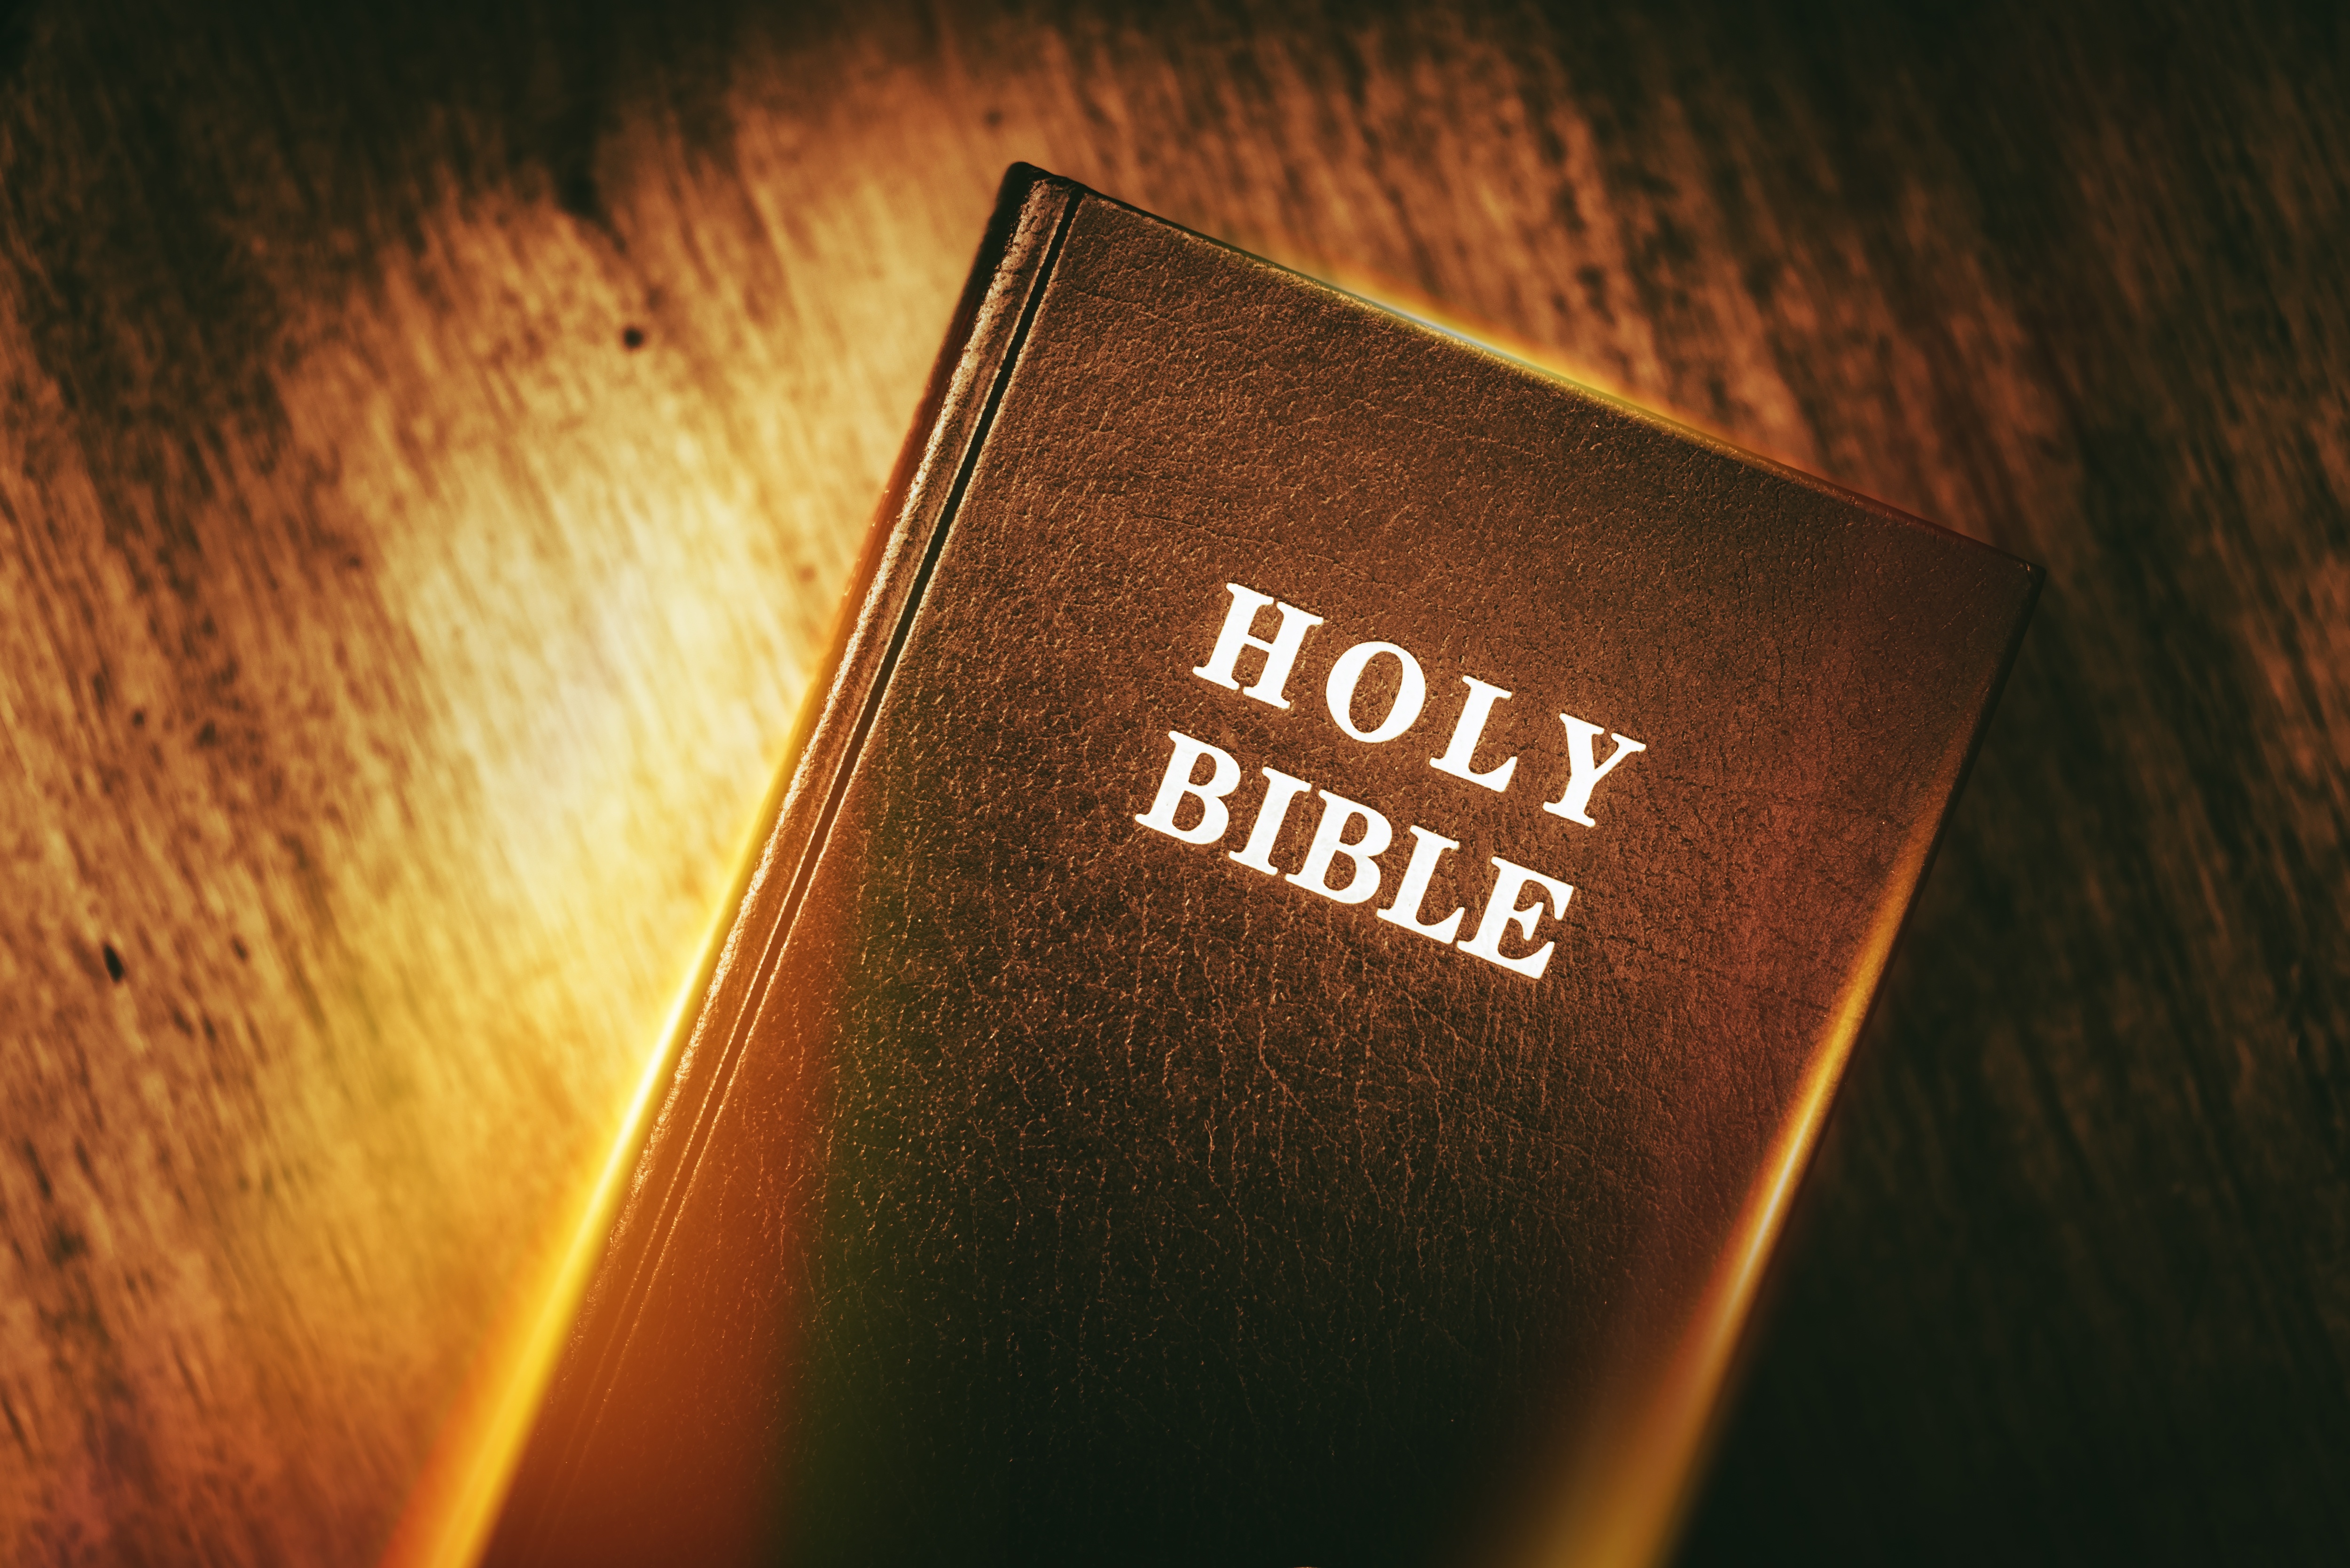 https://www.ucg.org/files/image/article/2018/01/05/can-we-believe-the-bible.jpg